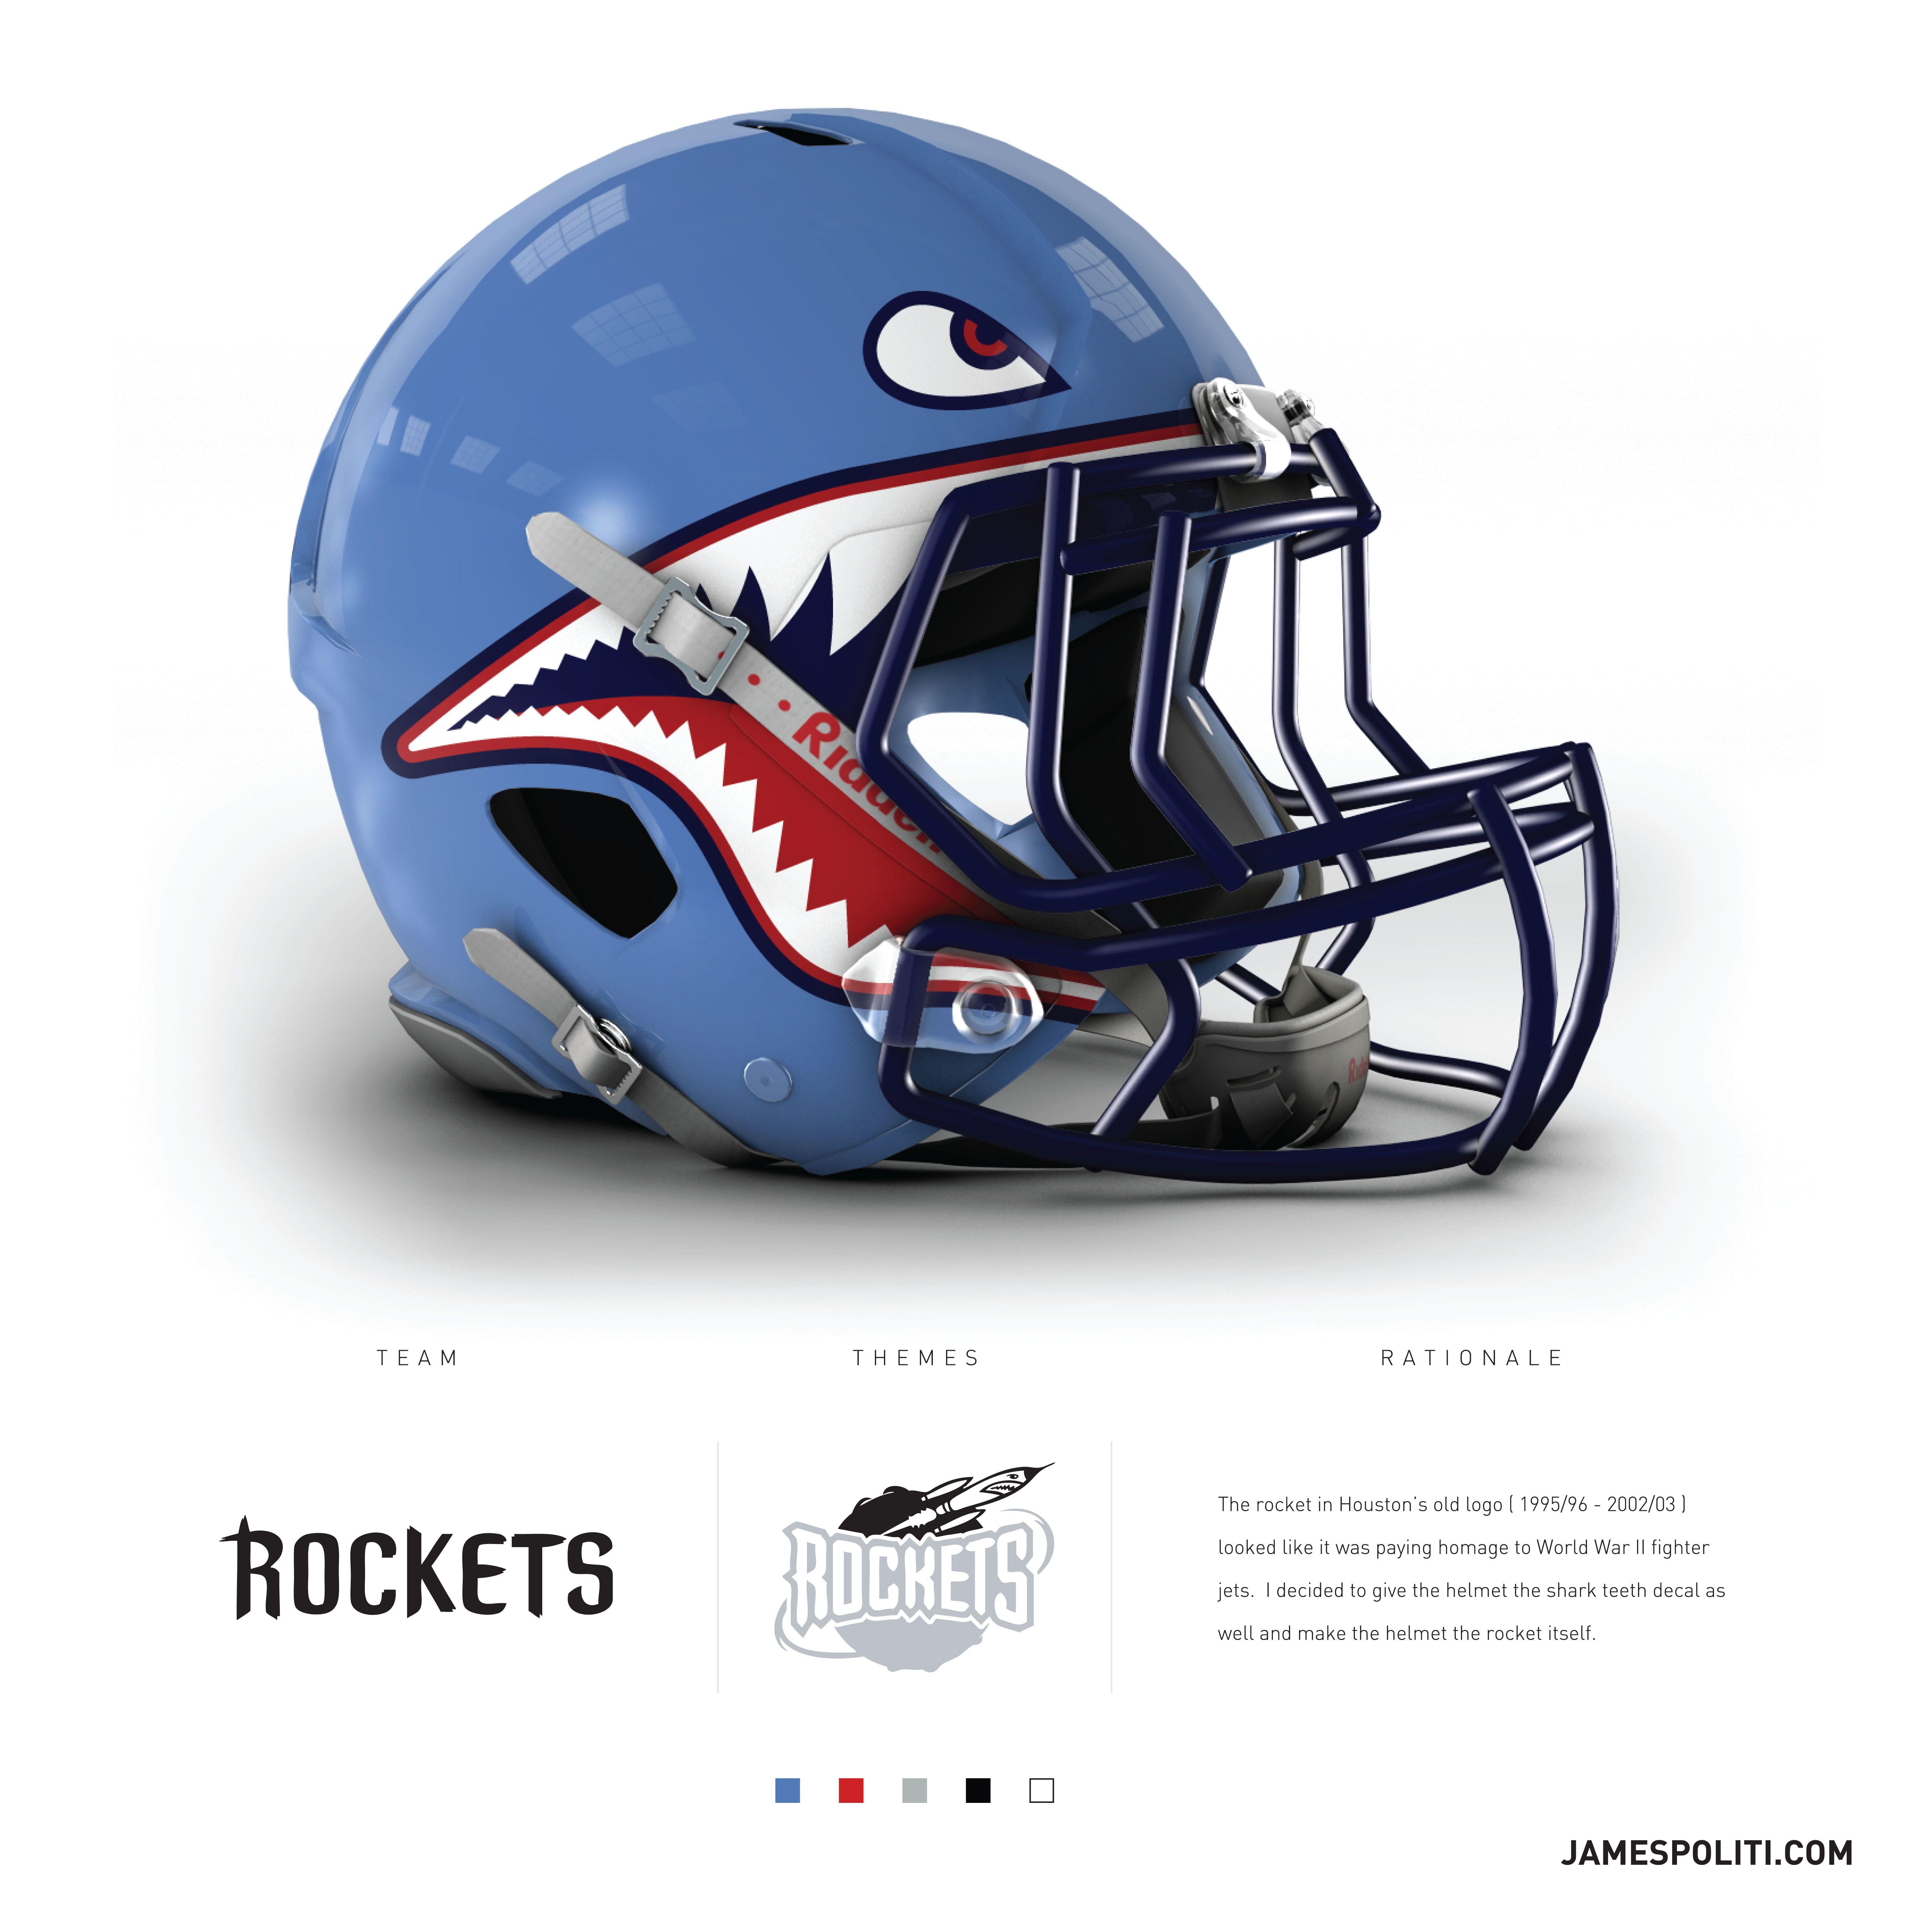 Cool Rockets Logo - What would it look like if NBA teams used football helmets? These